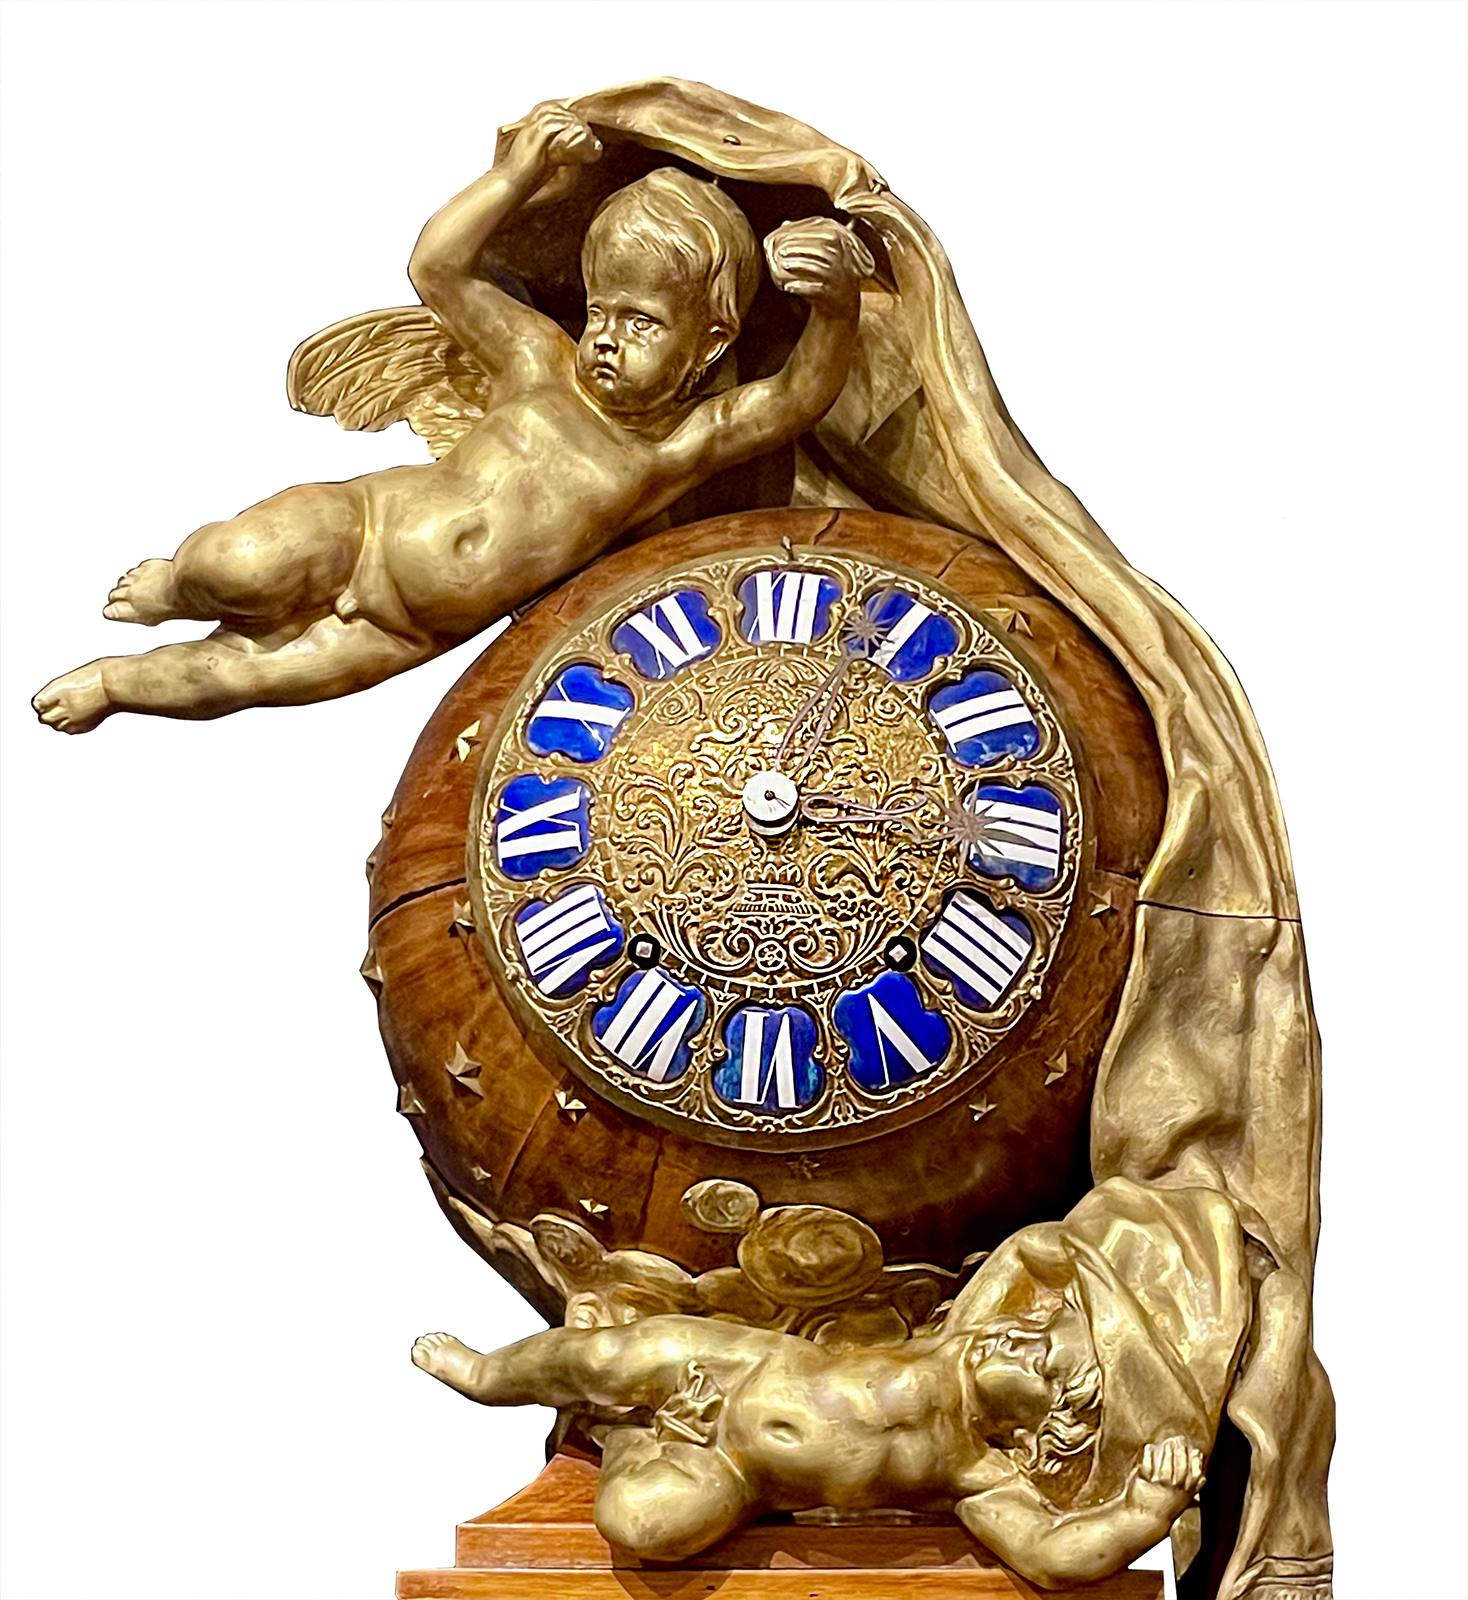 A 19th century Louis XVI Style gilt bronze and mahogany grandfather clock with cherub figures and pendulum. 

Dimensions: 104